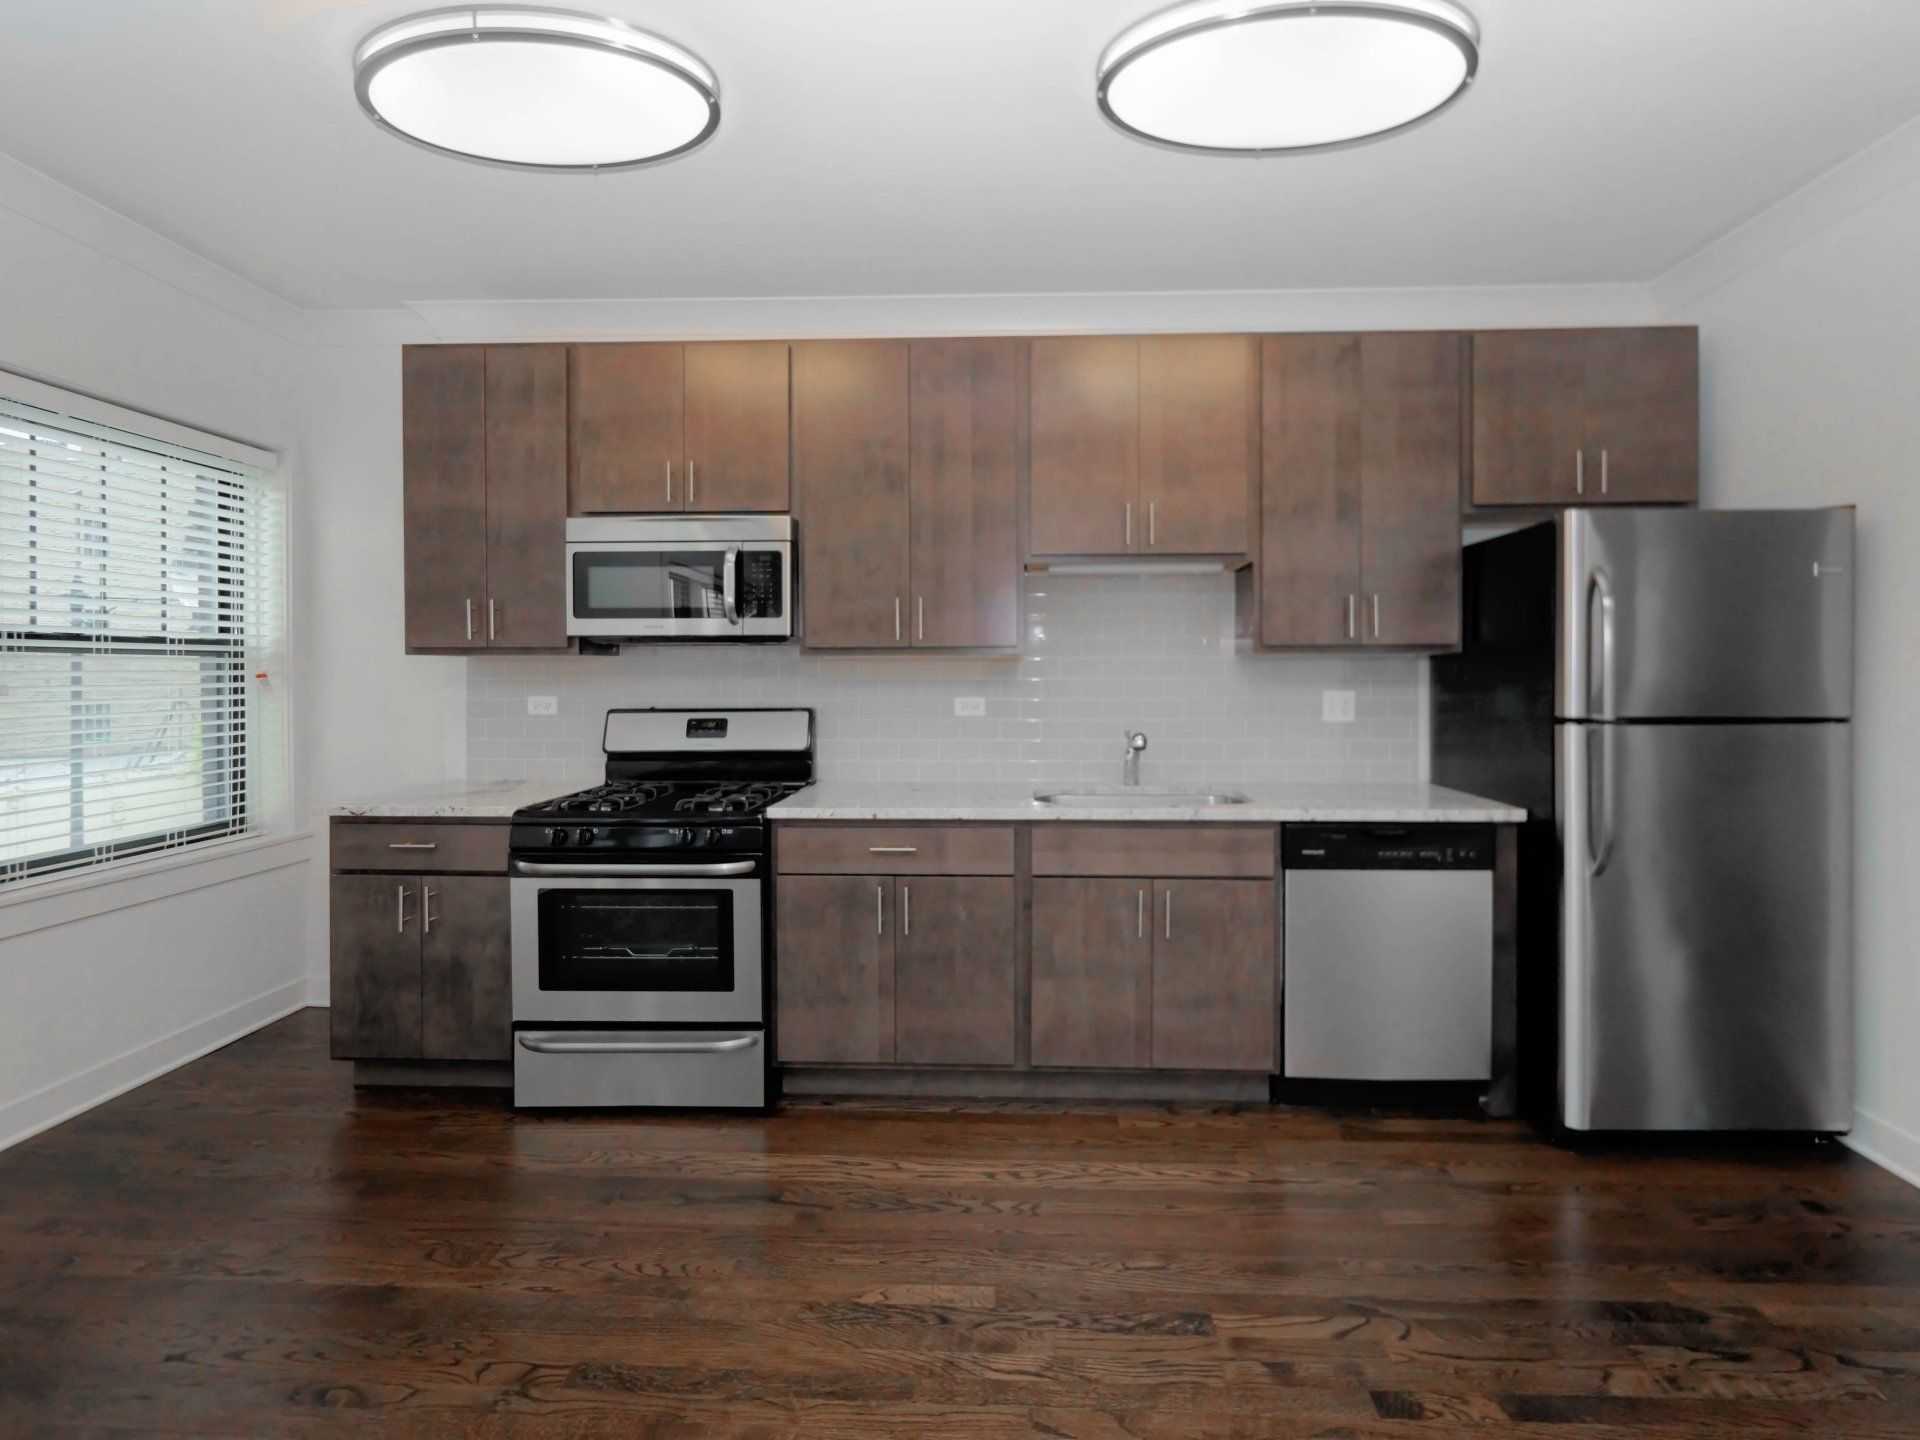 A kitchen with stainless steel appliances and wooden cabinets at 5425 N Clark Street.